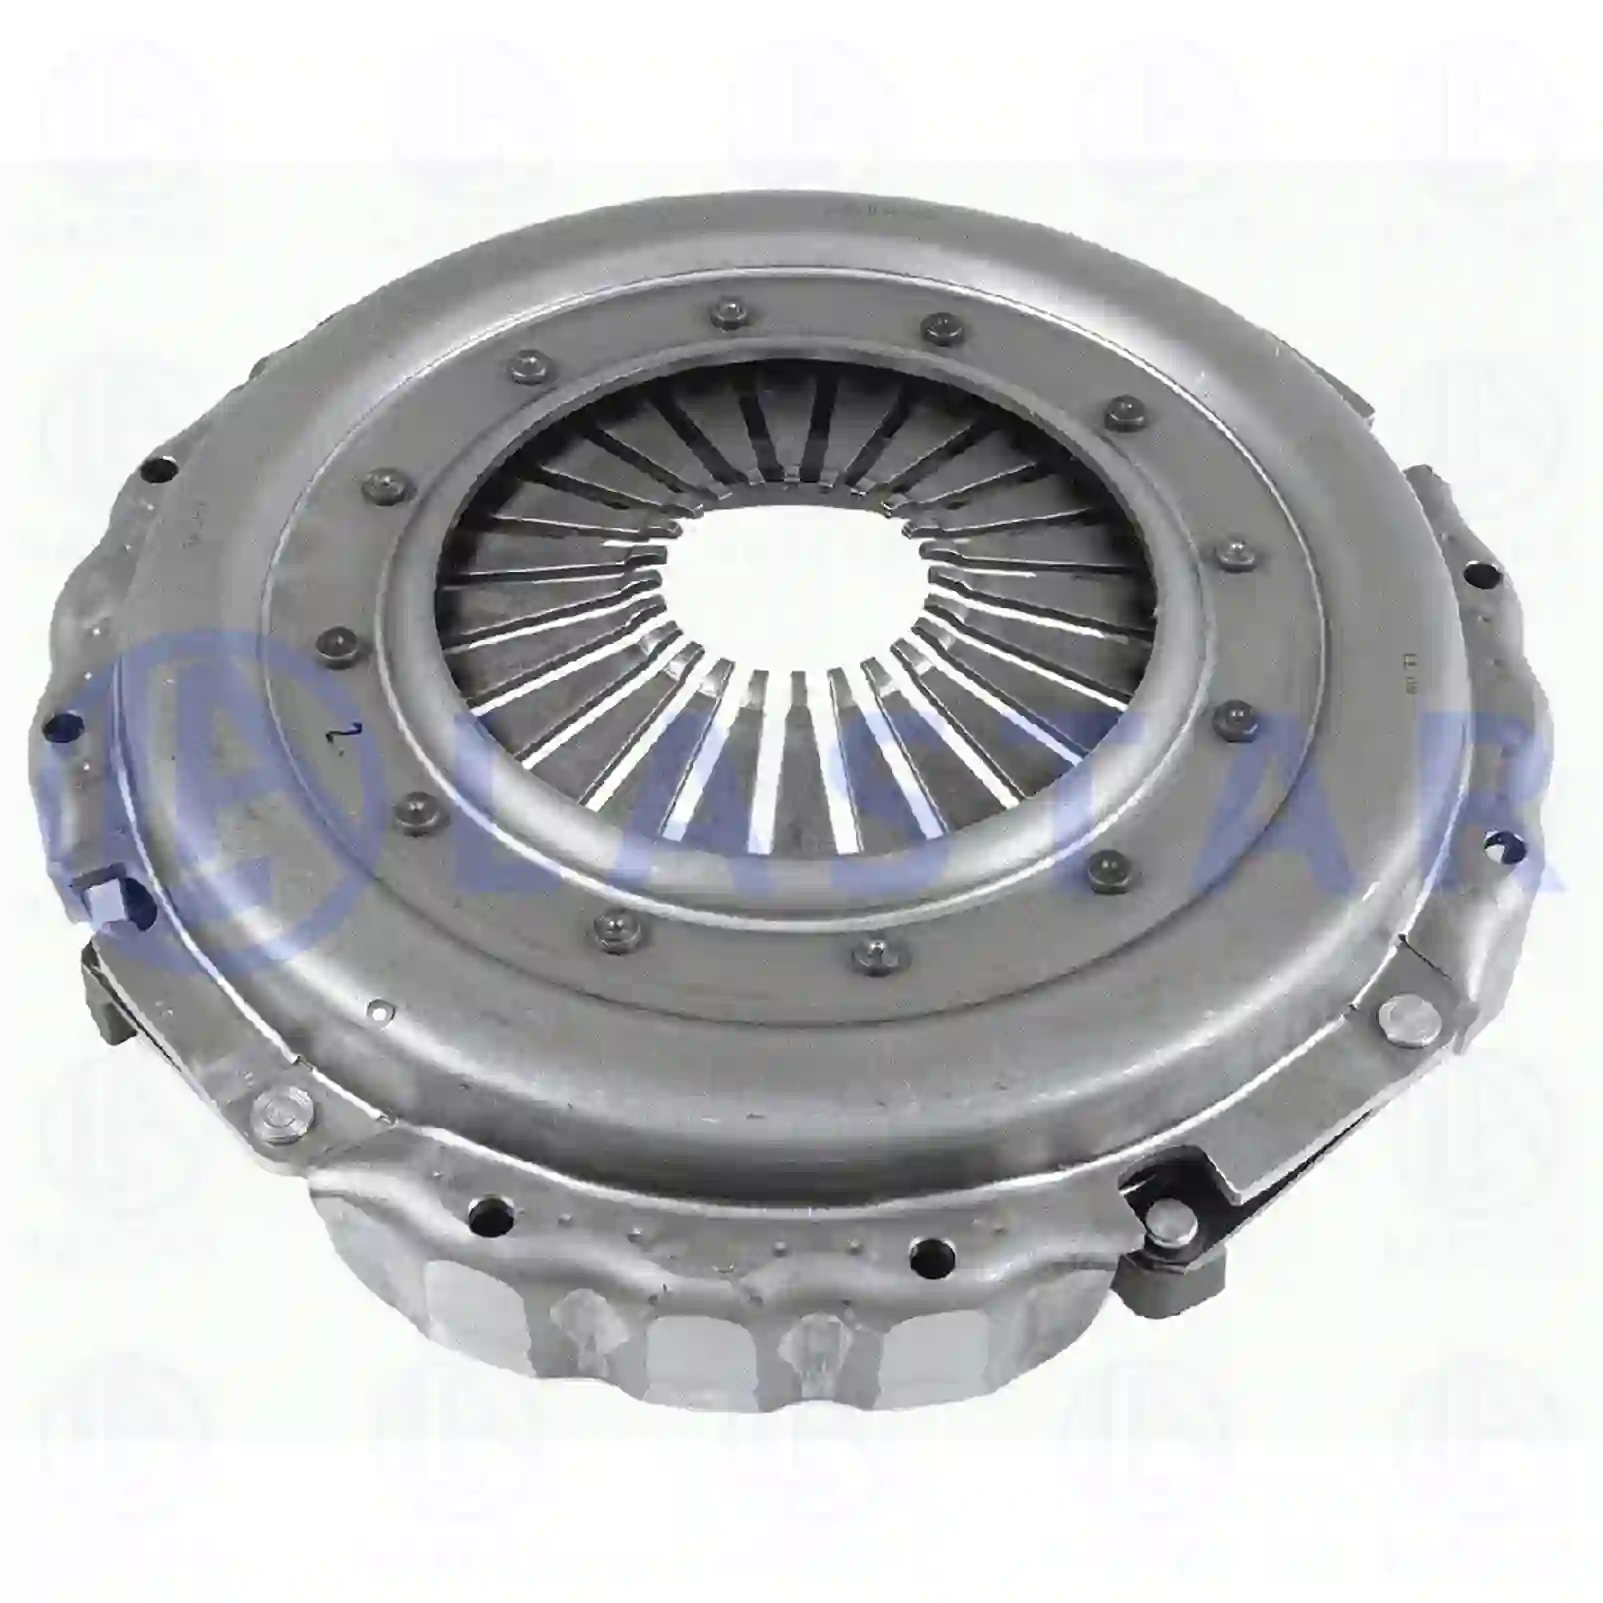 Clutch cover, 77722855, 5001867644, 5010452422, 5010545983, 7420981951, 7421005308, 20812540, 21005310 ||  77722855 Lastar Spare Part | Truck Spare Parts, Auotomotive Spare Parts Clutch cover, 77722855, 5001867644, 5010452422, 5010545983, 7420981951, 7421005308, 20812540, 21005310 ||  77722855 Lastar Spare Part | Truck Spare Parts, Auotomotive Spare Parts